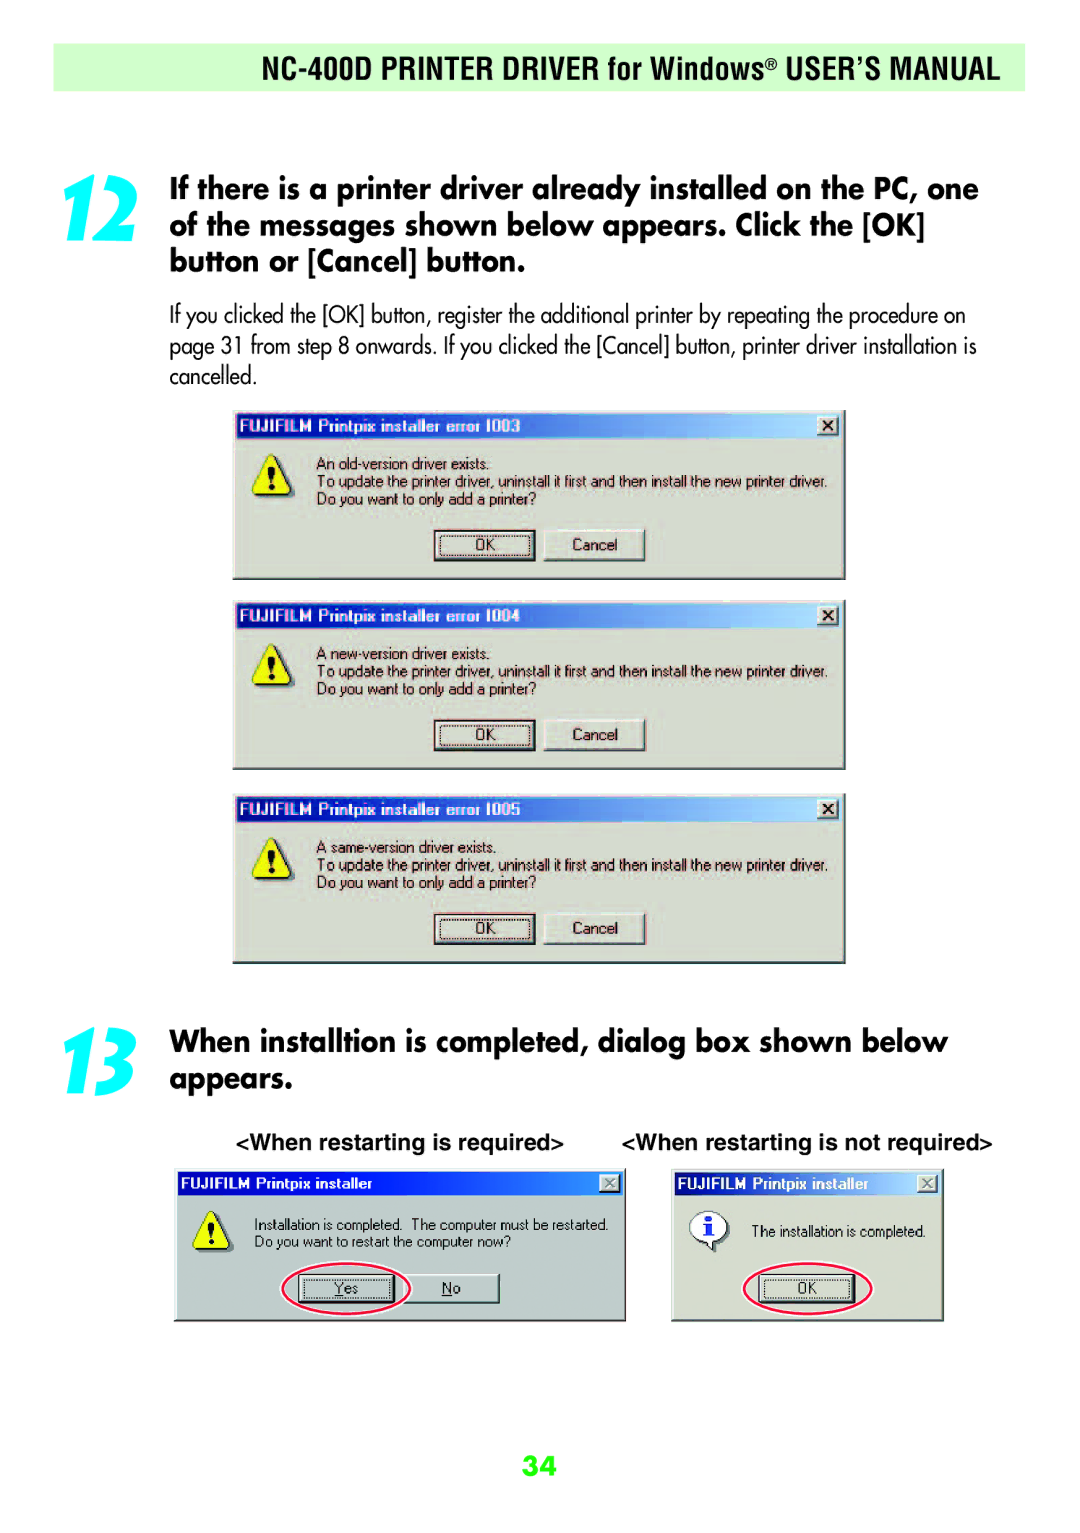 FujiFilm NC-400D user manual Messages shown below appears. Click the OK, Button or Cancel button, Appears 